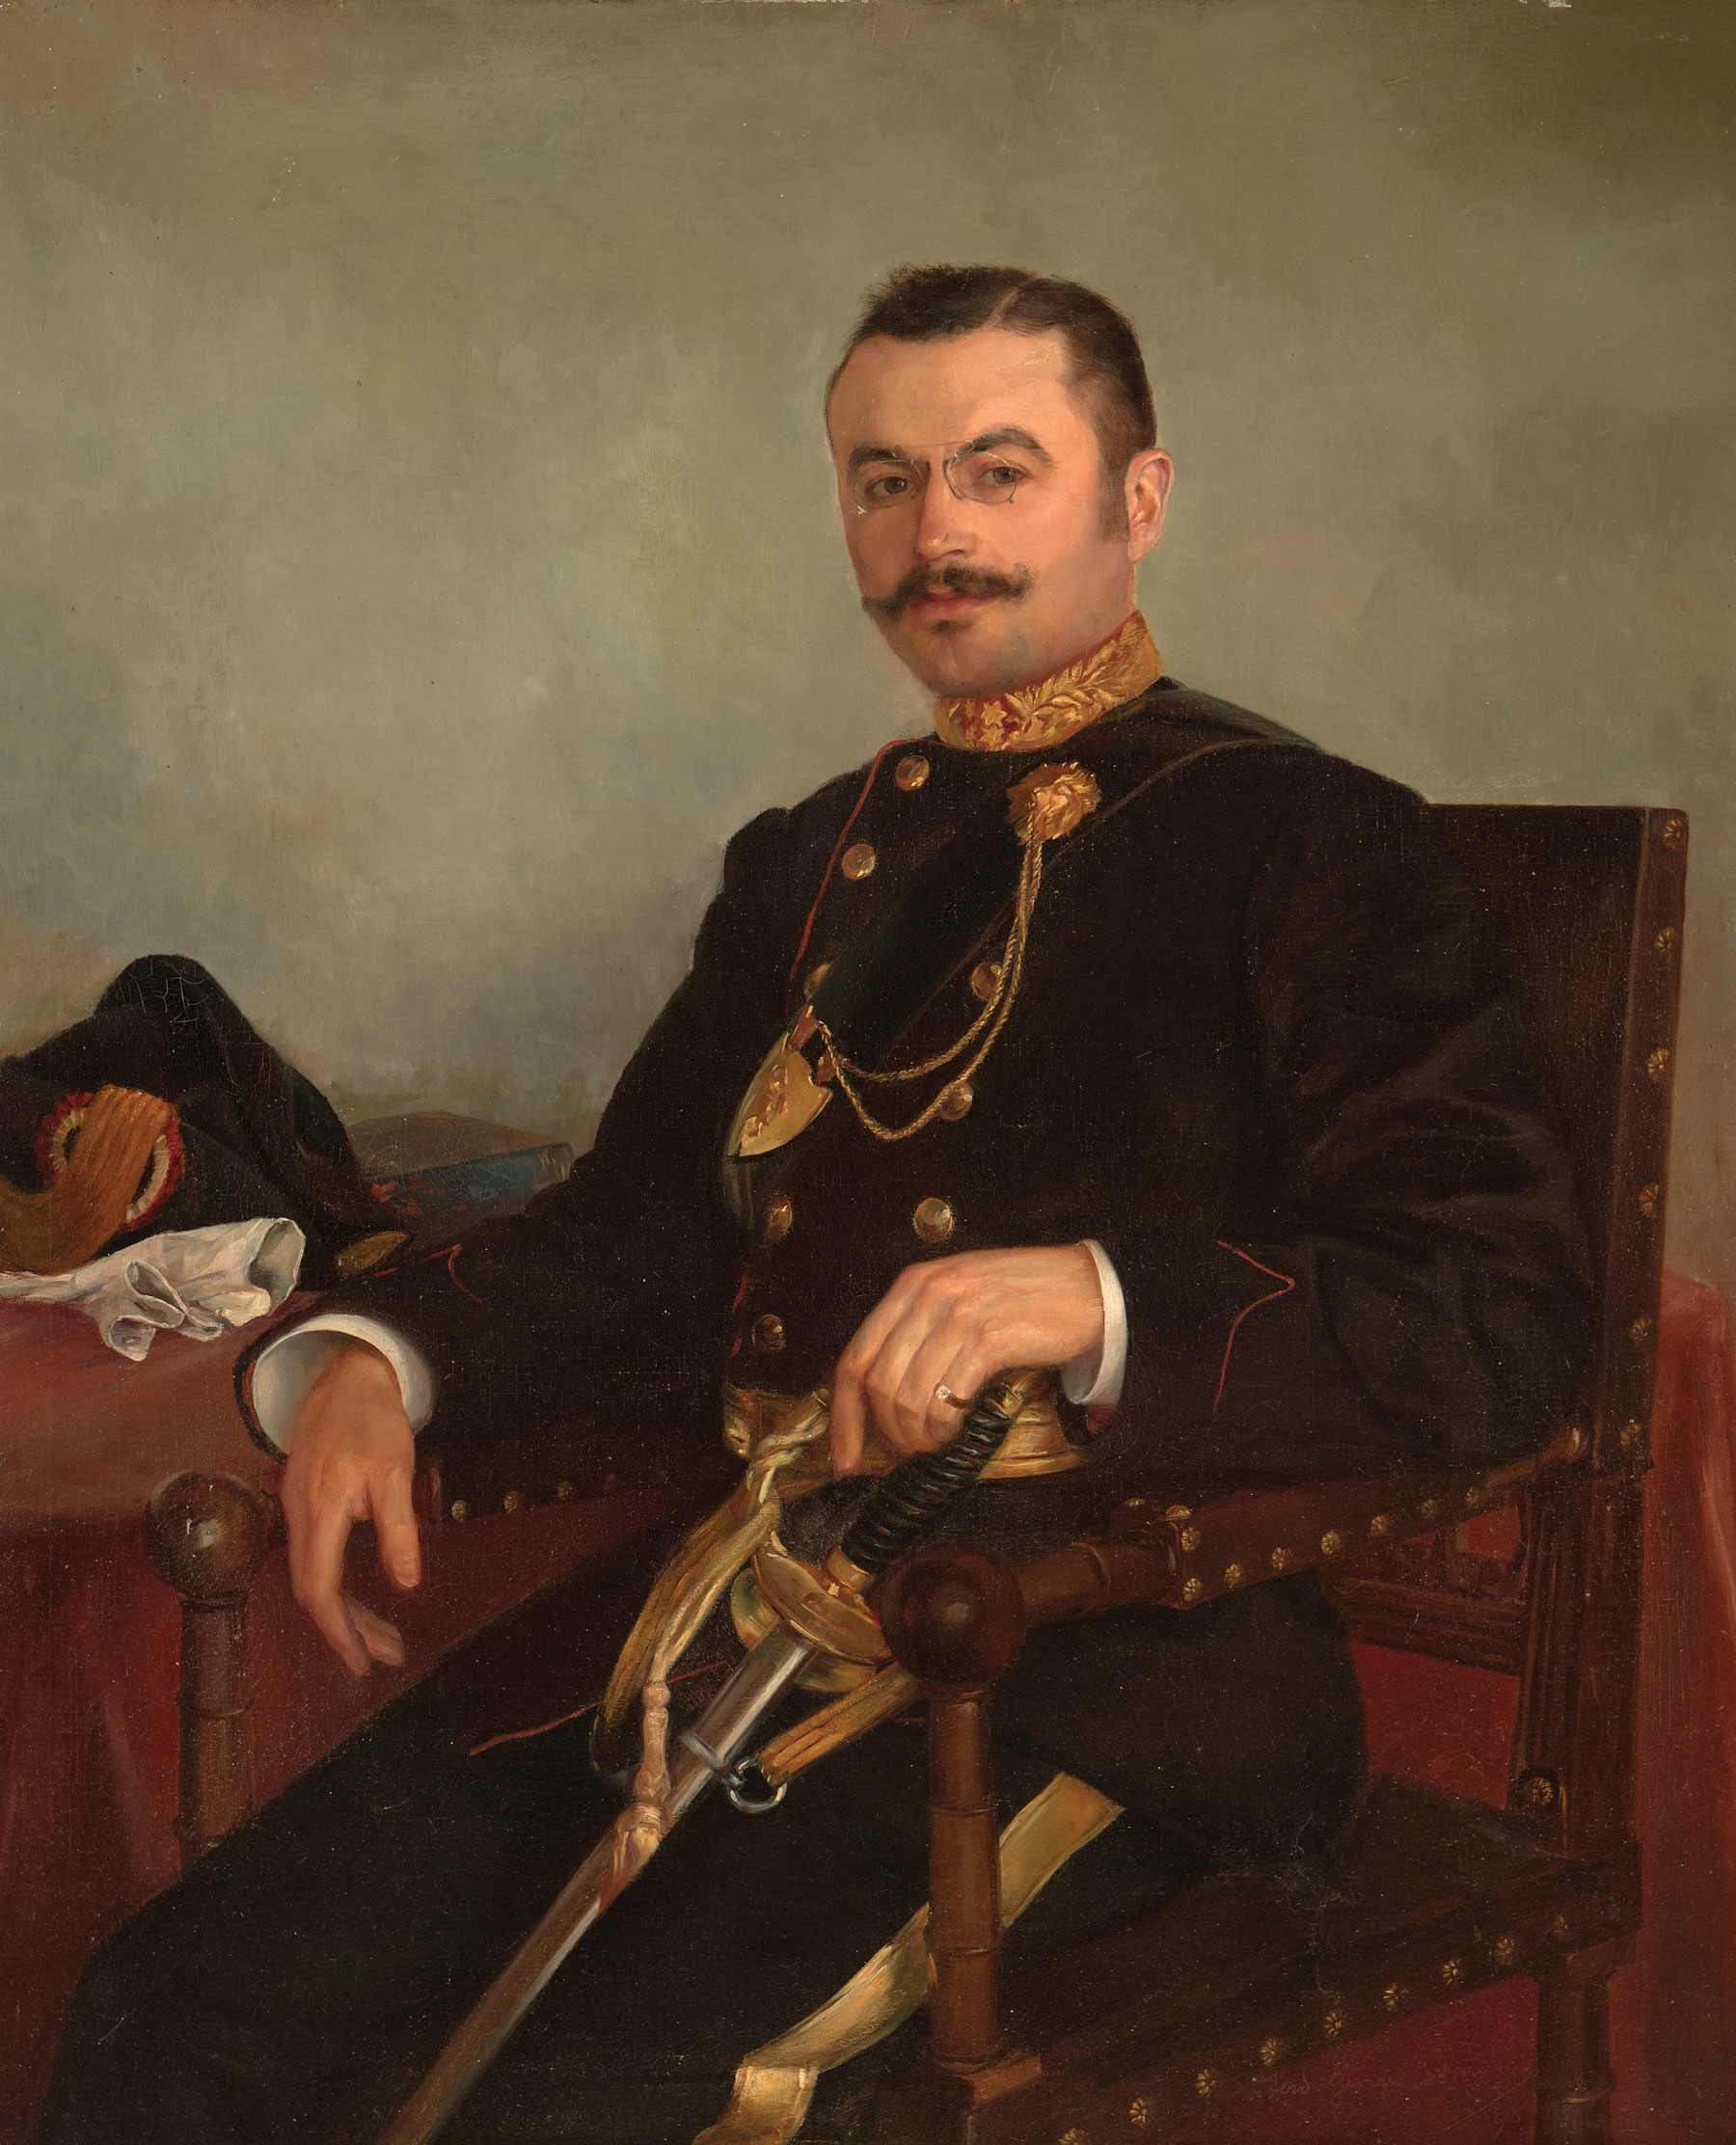 Georges Lemmers (Belgian, 1871-1944), "Portrait of a Seated Military Officer", 1898, oil on